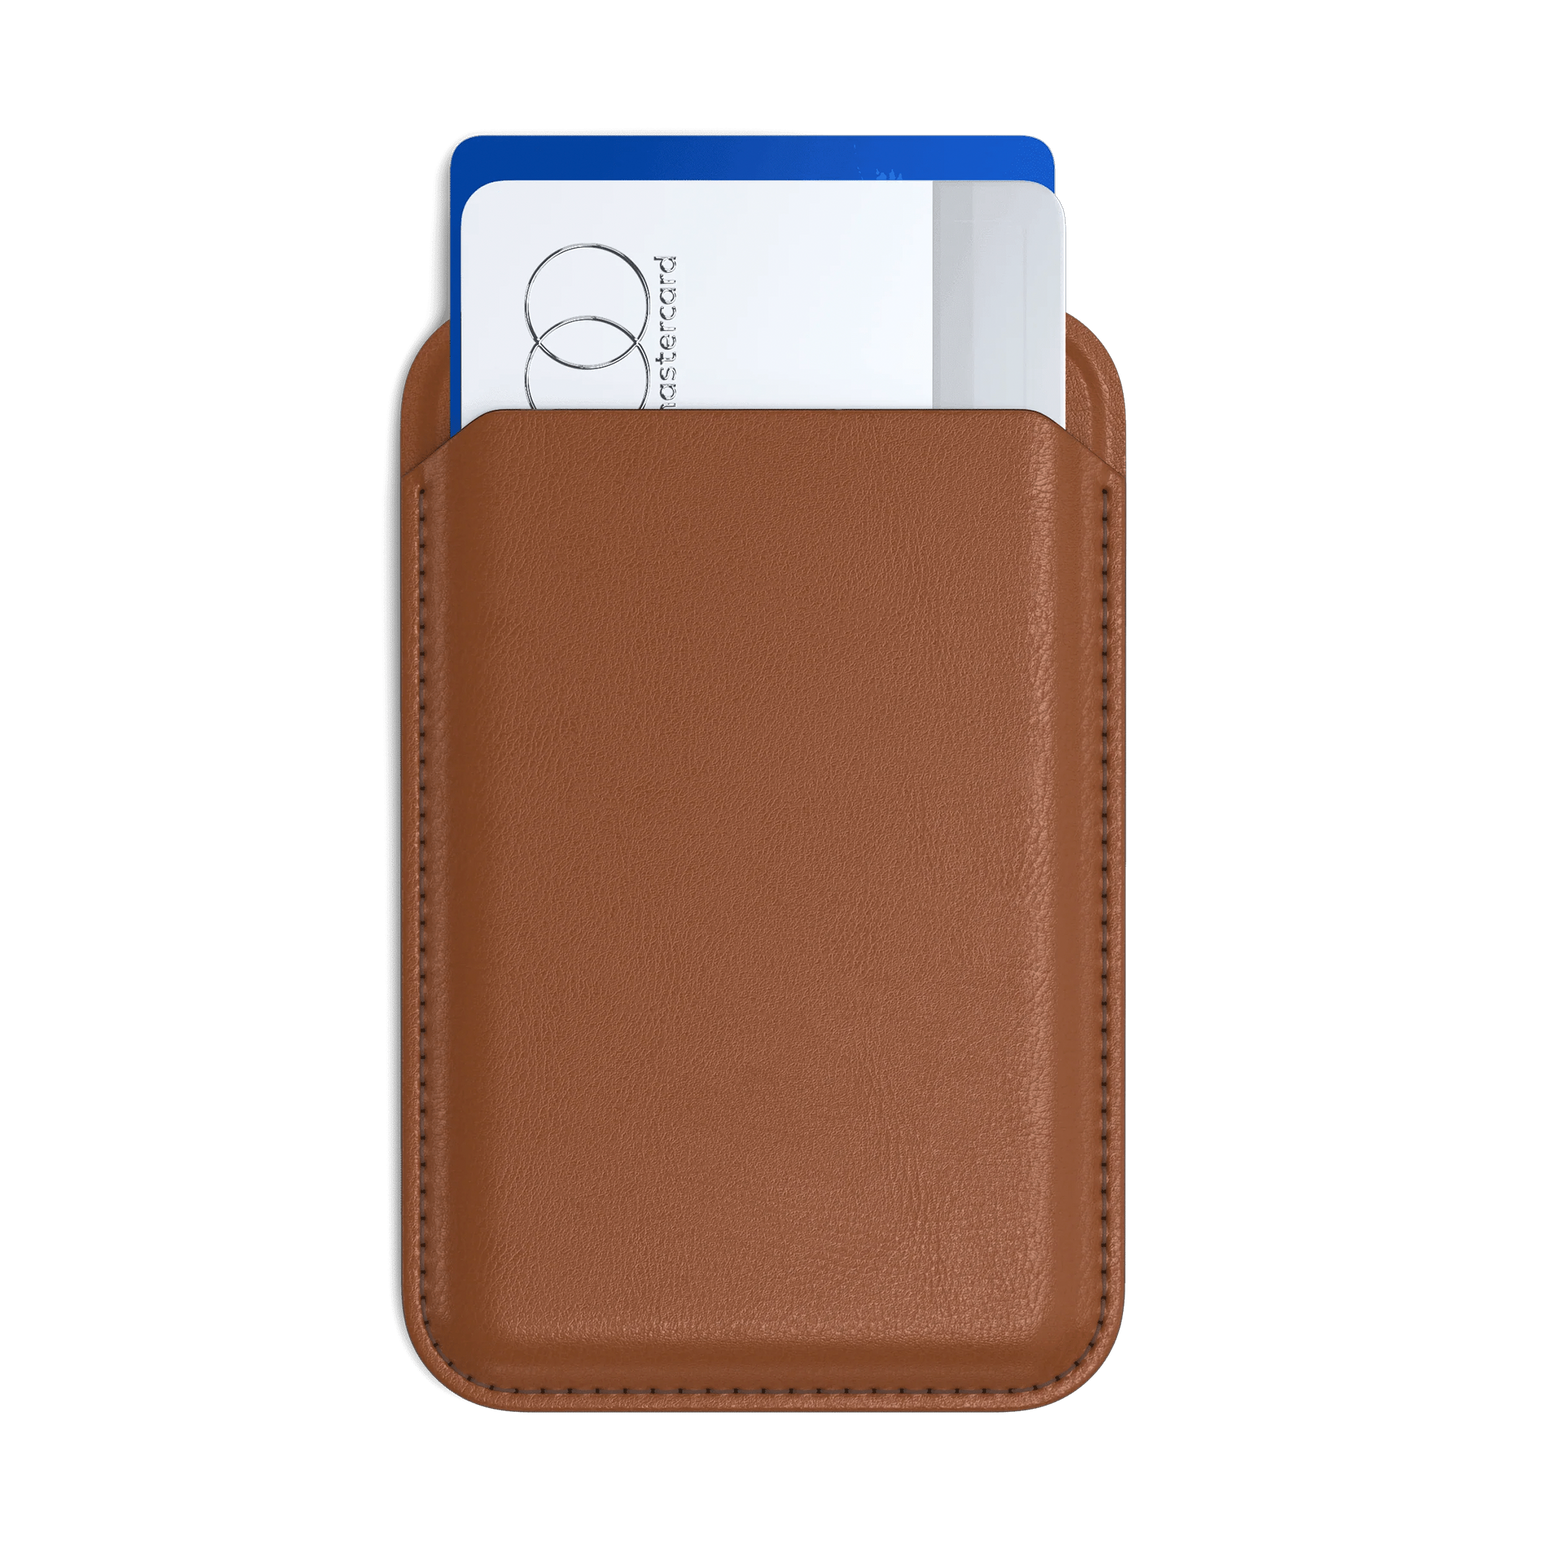 Satechi Vegan Leather Magnetic Wallet Stand - Brown